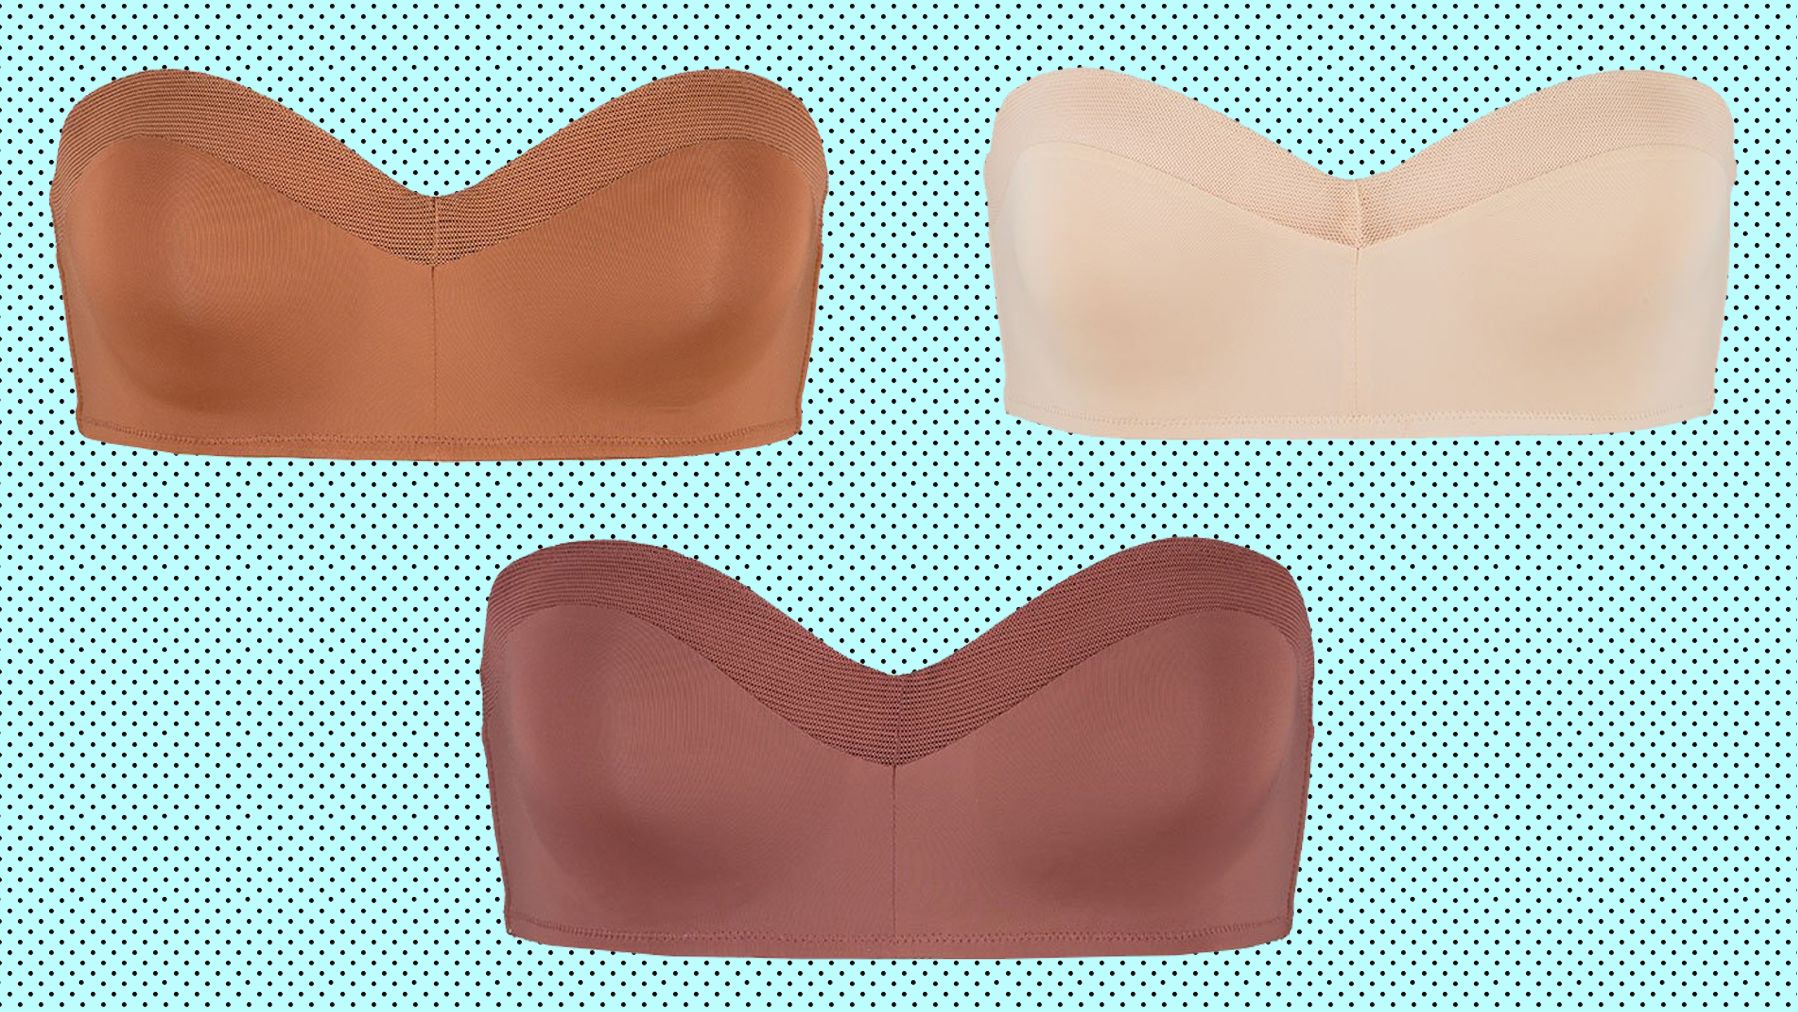 The Strapless Challenge - Watch our H cups put it to the test